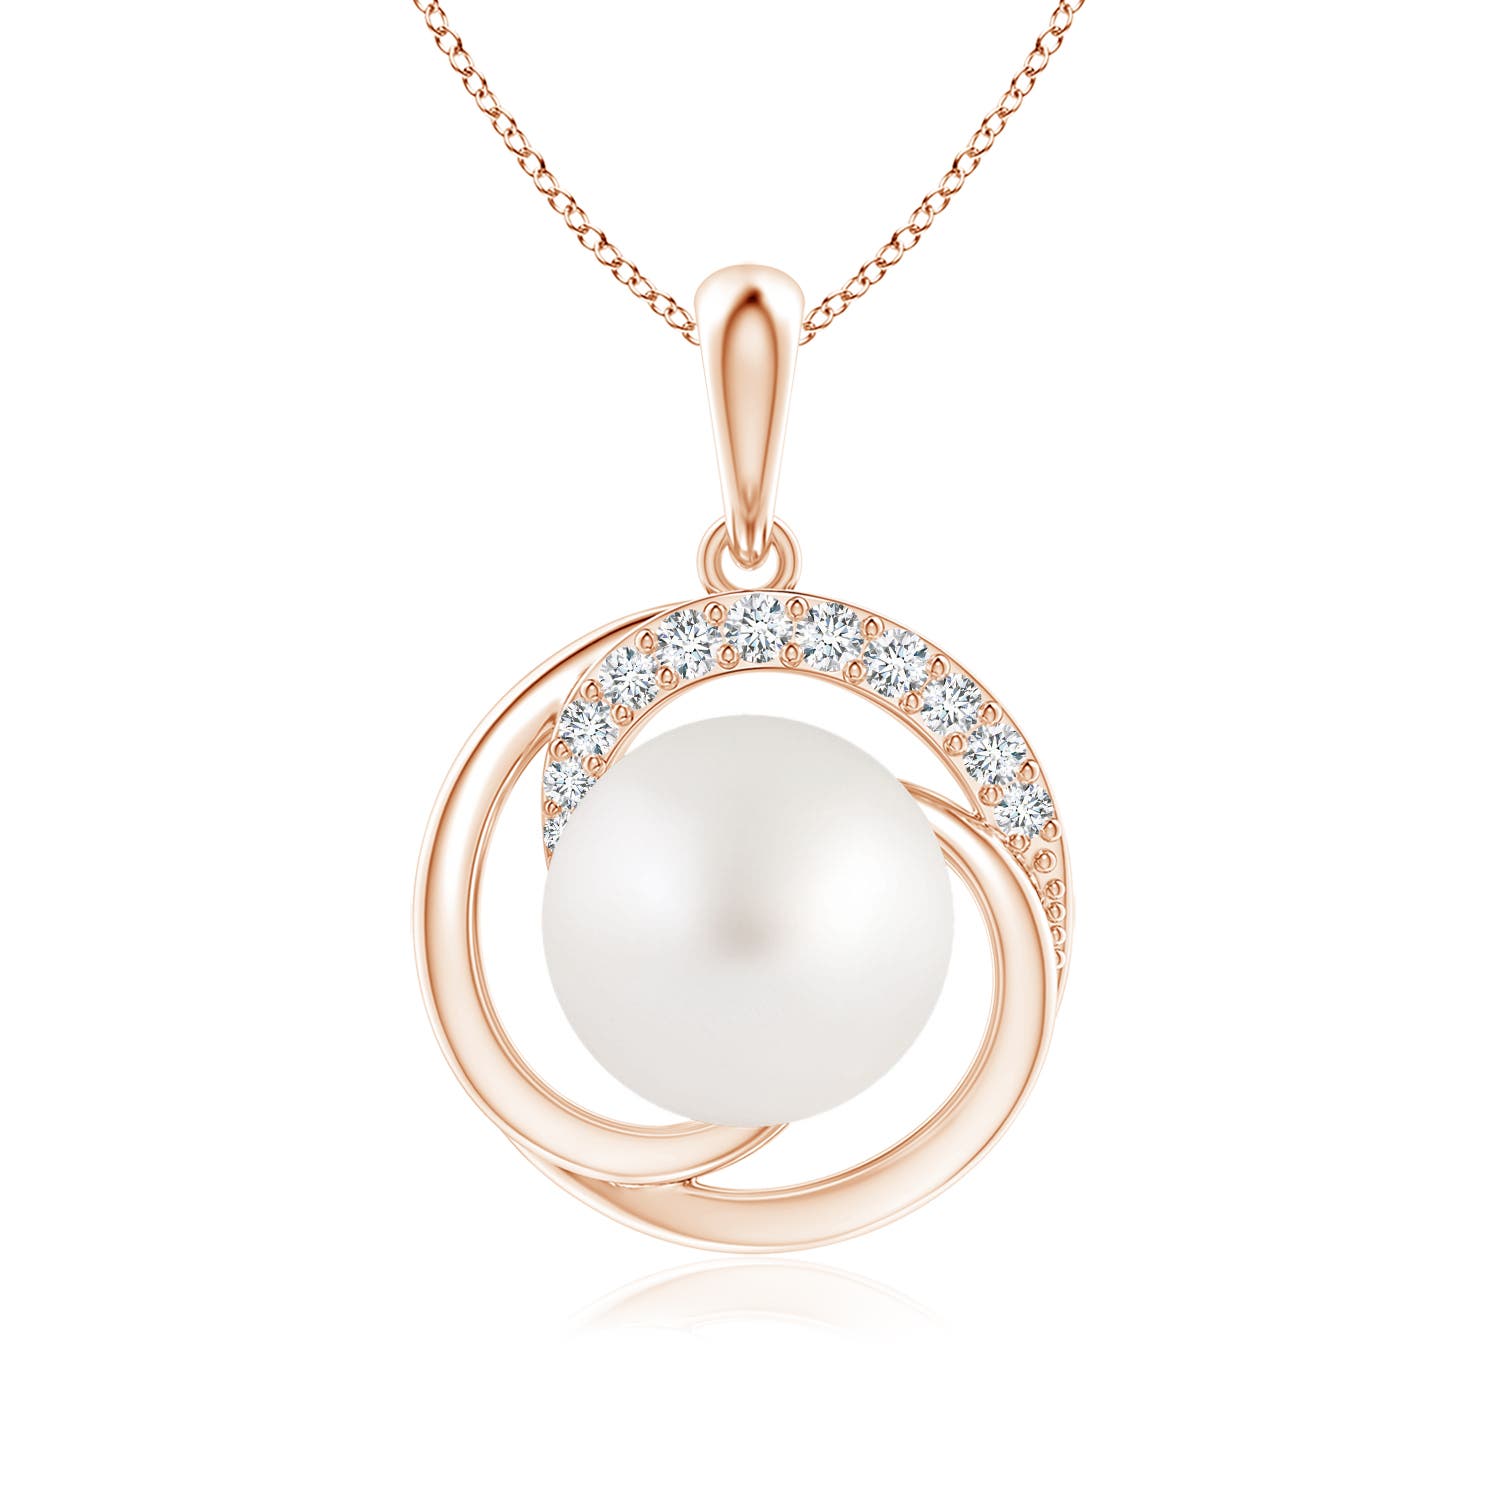 AA - South Sea Cultured Pearl / 5.36 CT / 14 KT Rose Gold